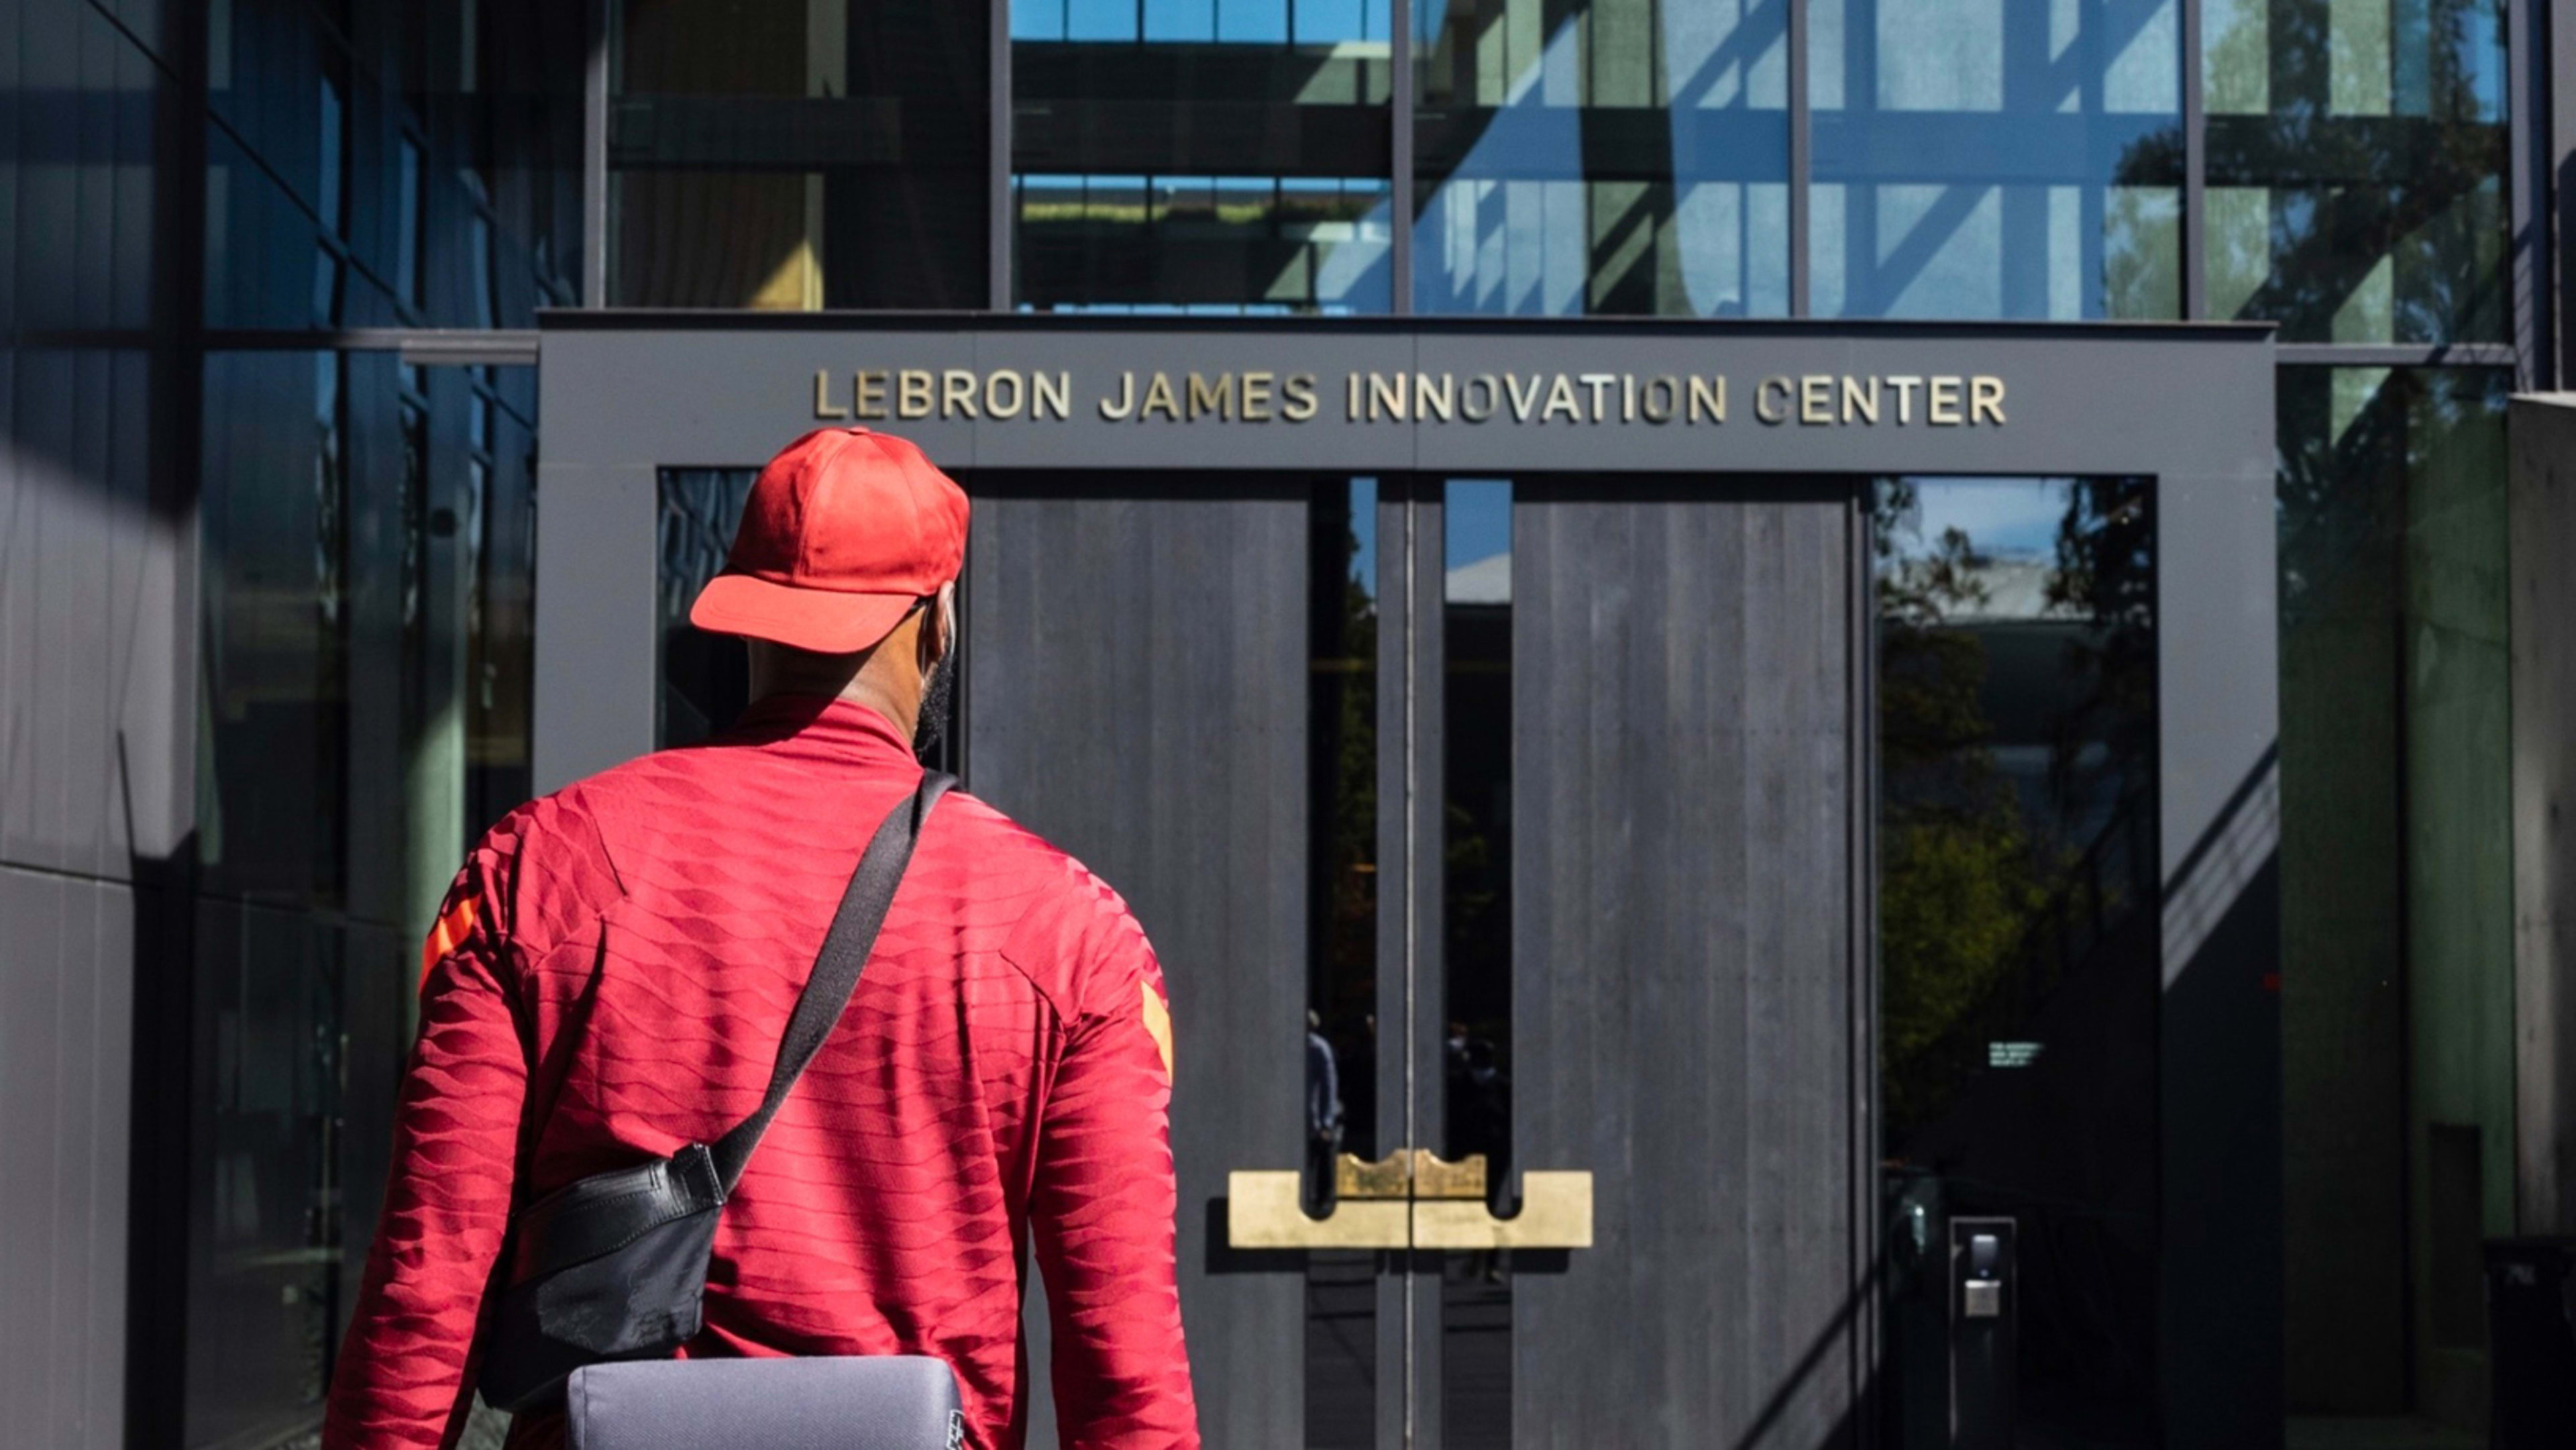 See the 8 most amazing sights at Nike’s new LeBron James Innovation Center